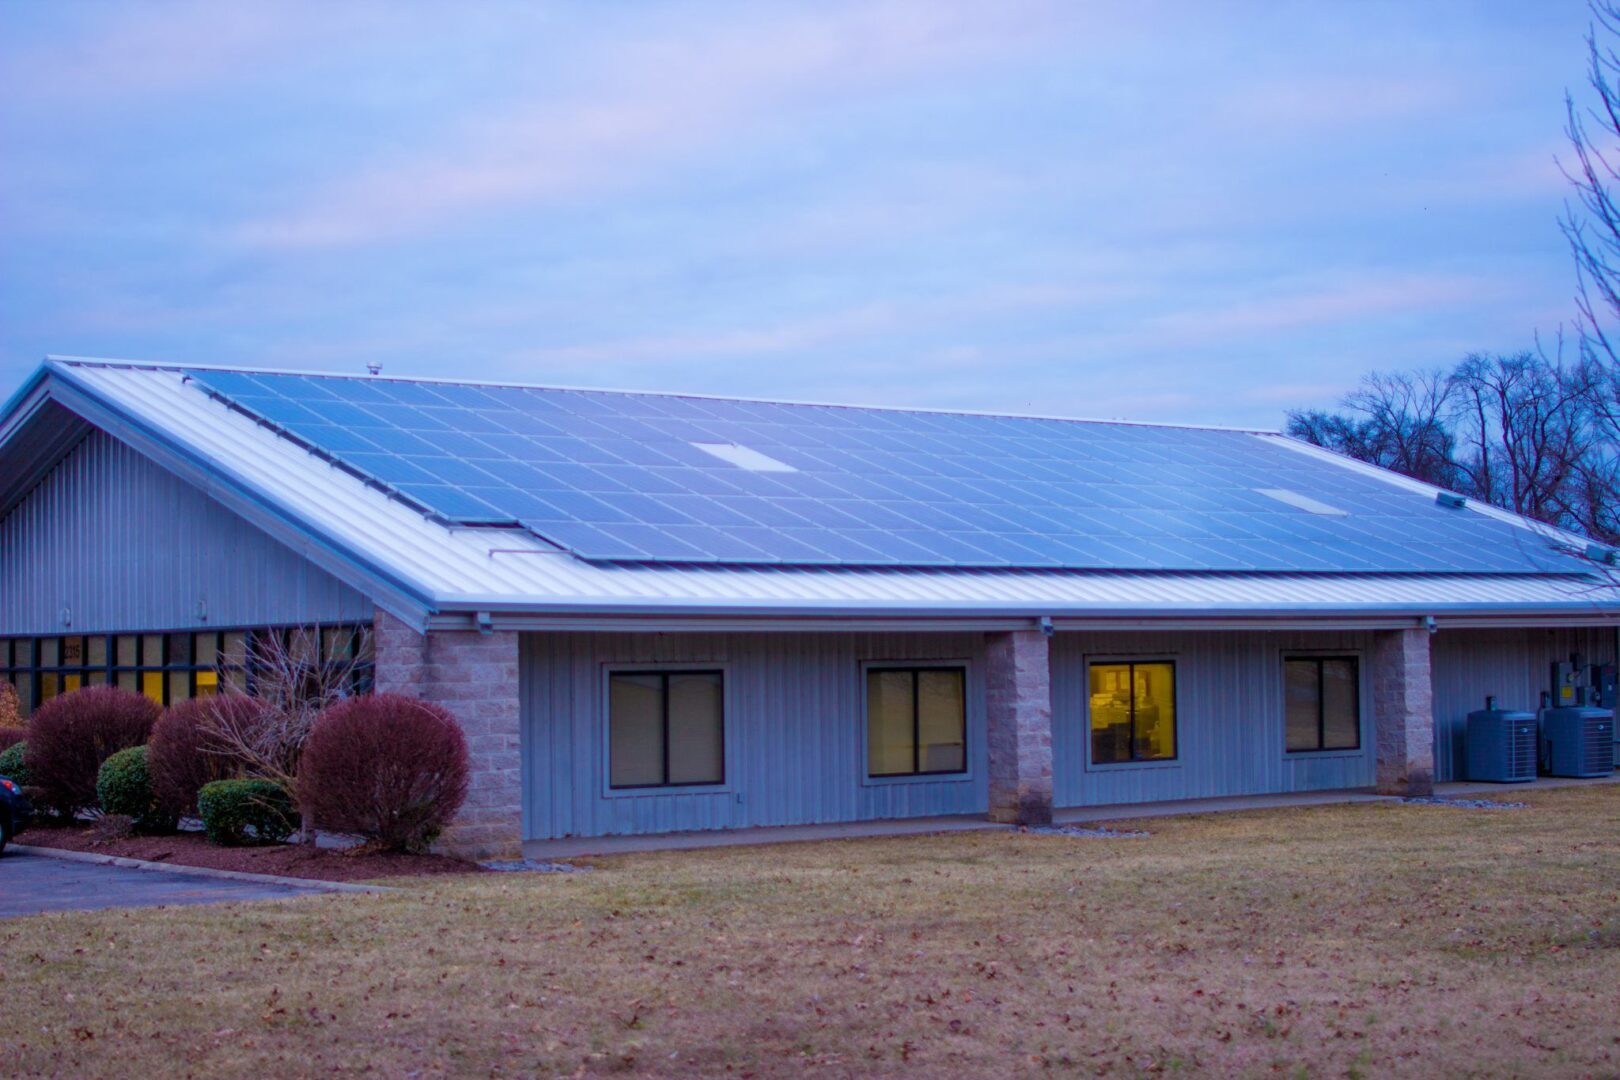 Standing Seam Metal Roof with Solar Panels Project